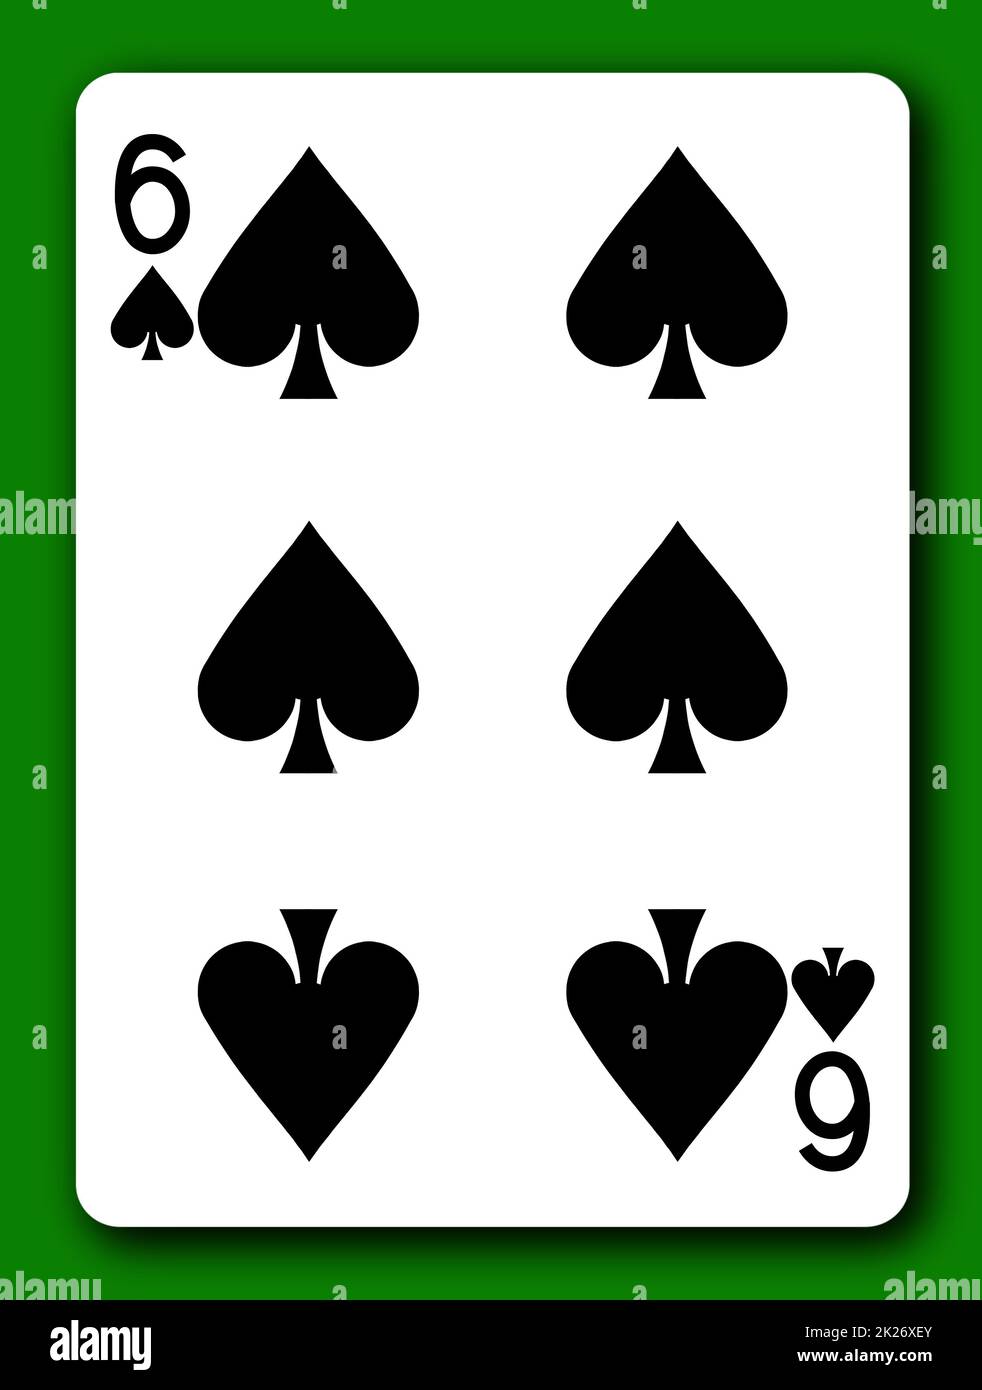 Six of Spades playing card with clipping path to remove background and shadow 3d illustration Stock Photo